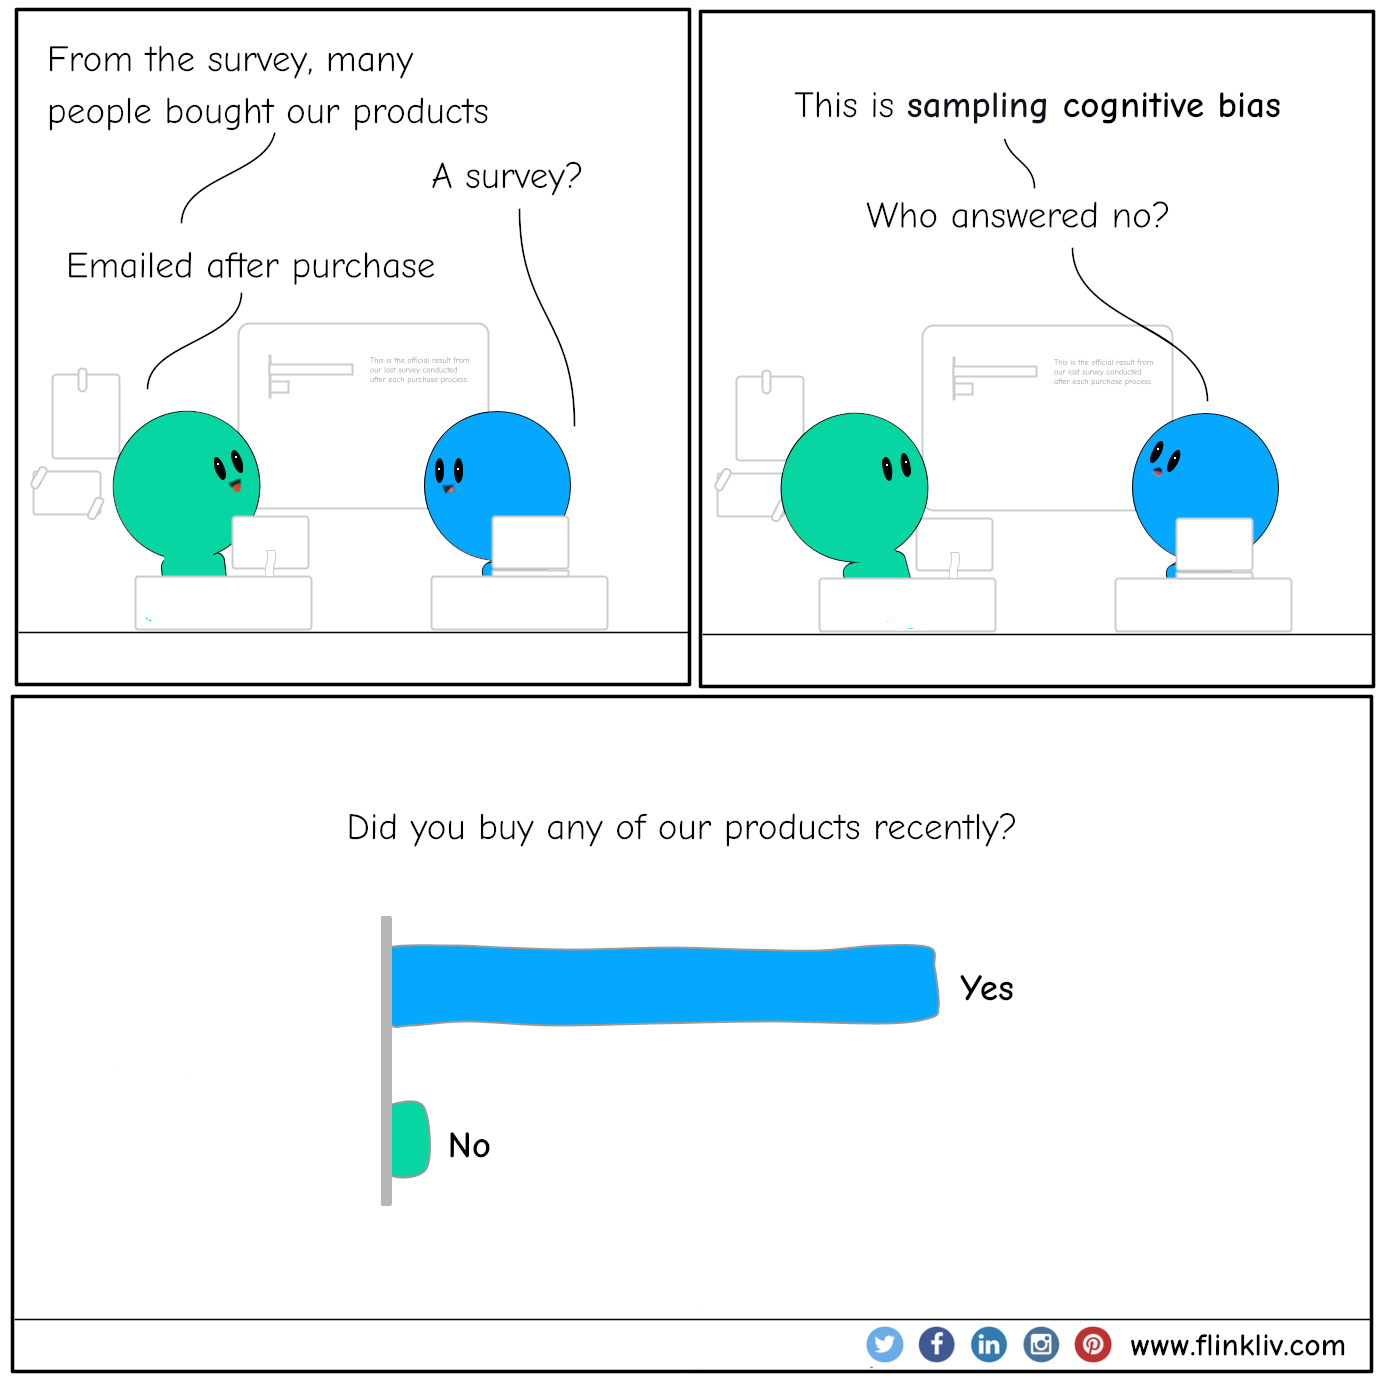 Conversation between A and B about sampling cognitive bias. 
              A:From the survey, many people bought our products.
			B: A survey?
			A:	Emailed after purchase
			B:	This is sample cognitive bias.
			B:	Who answered no?  